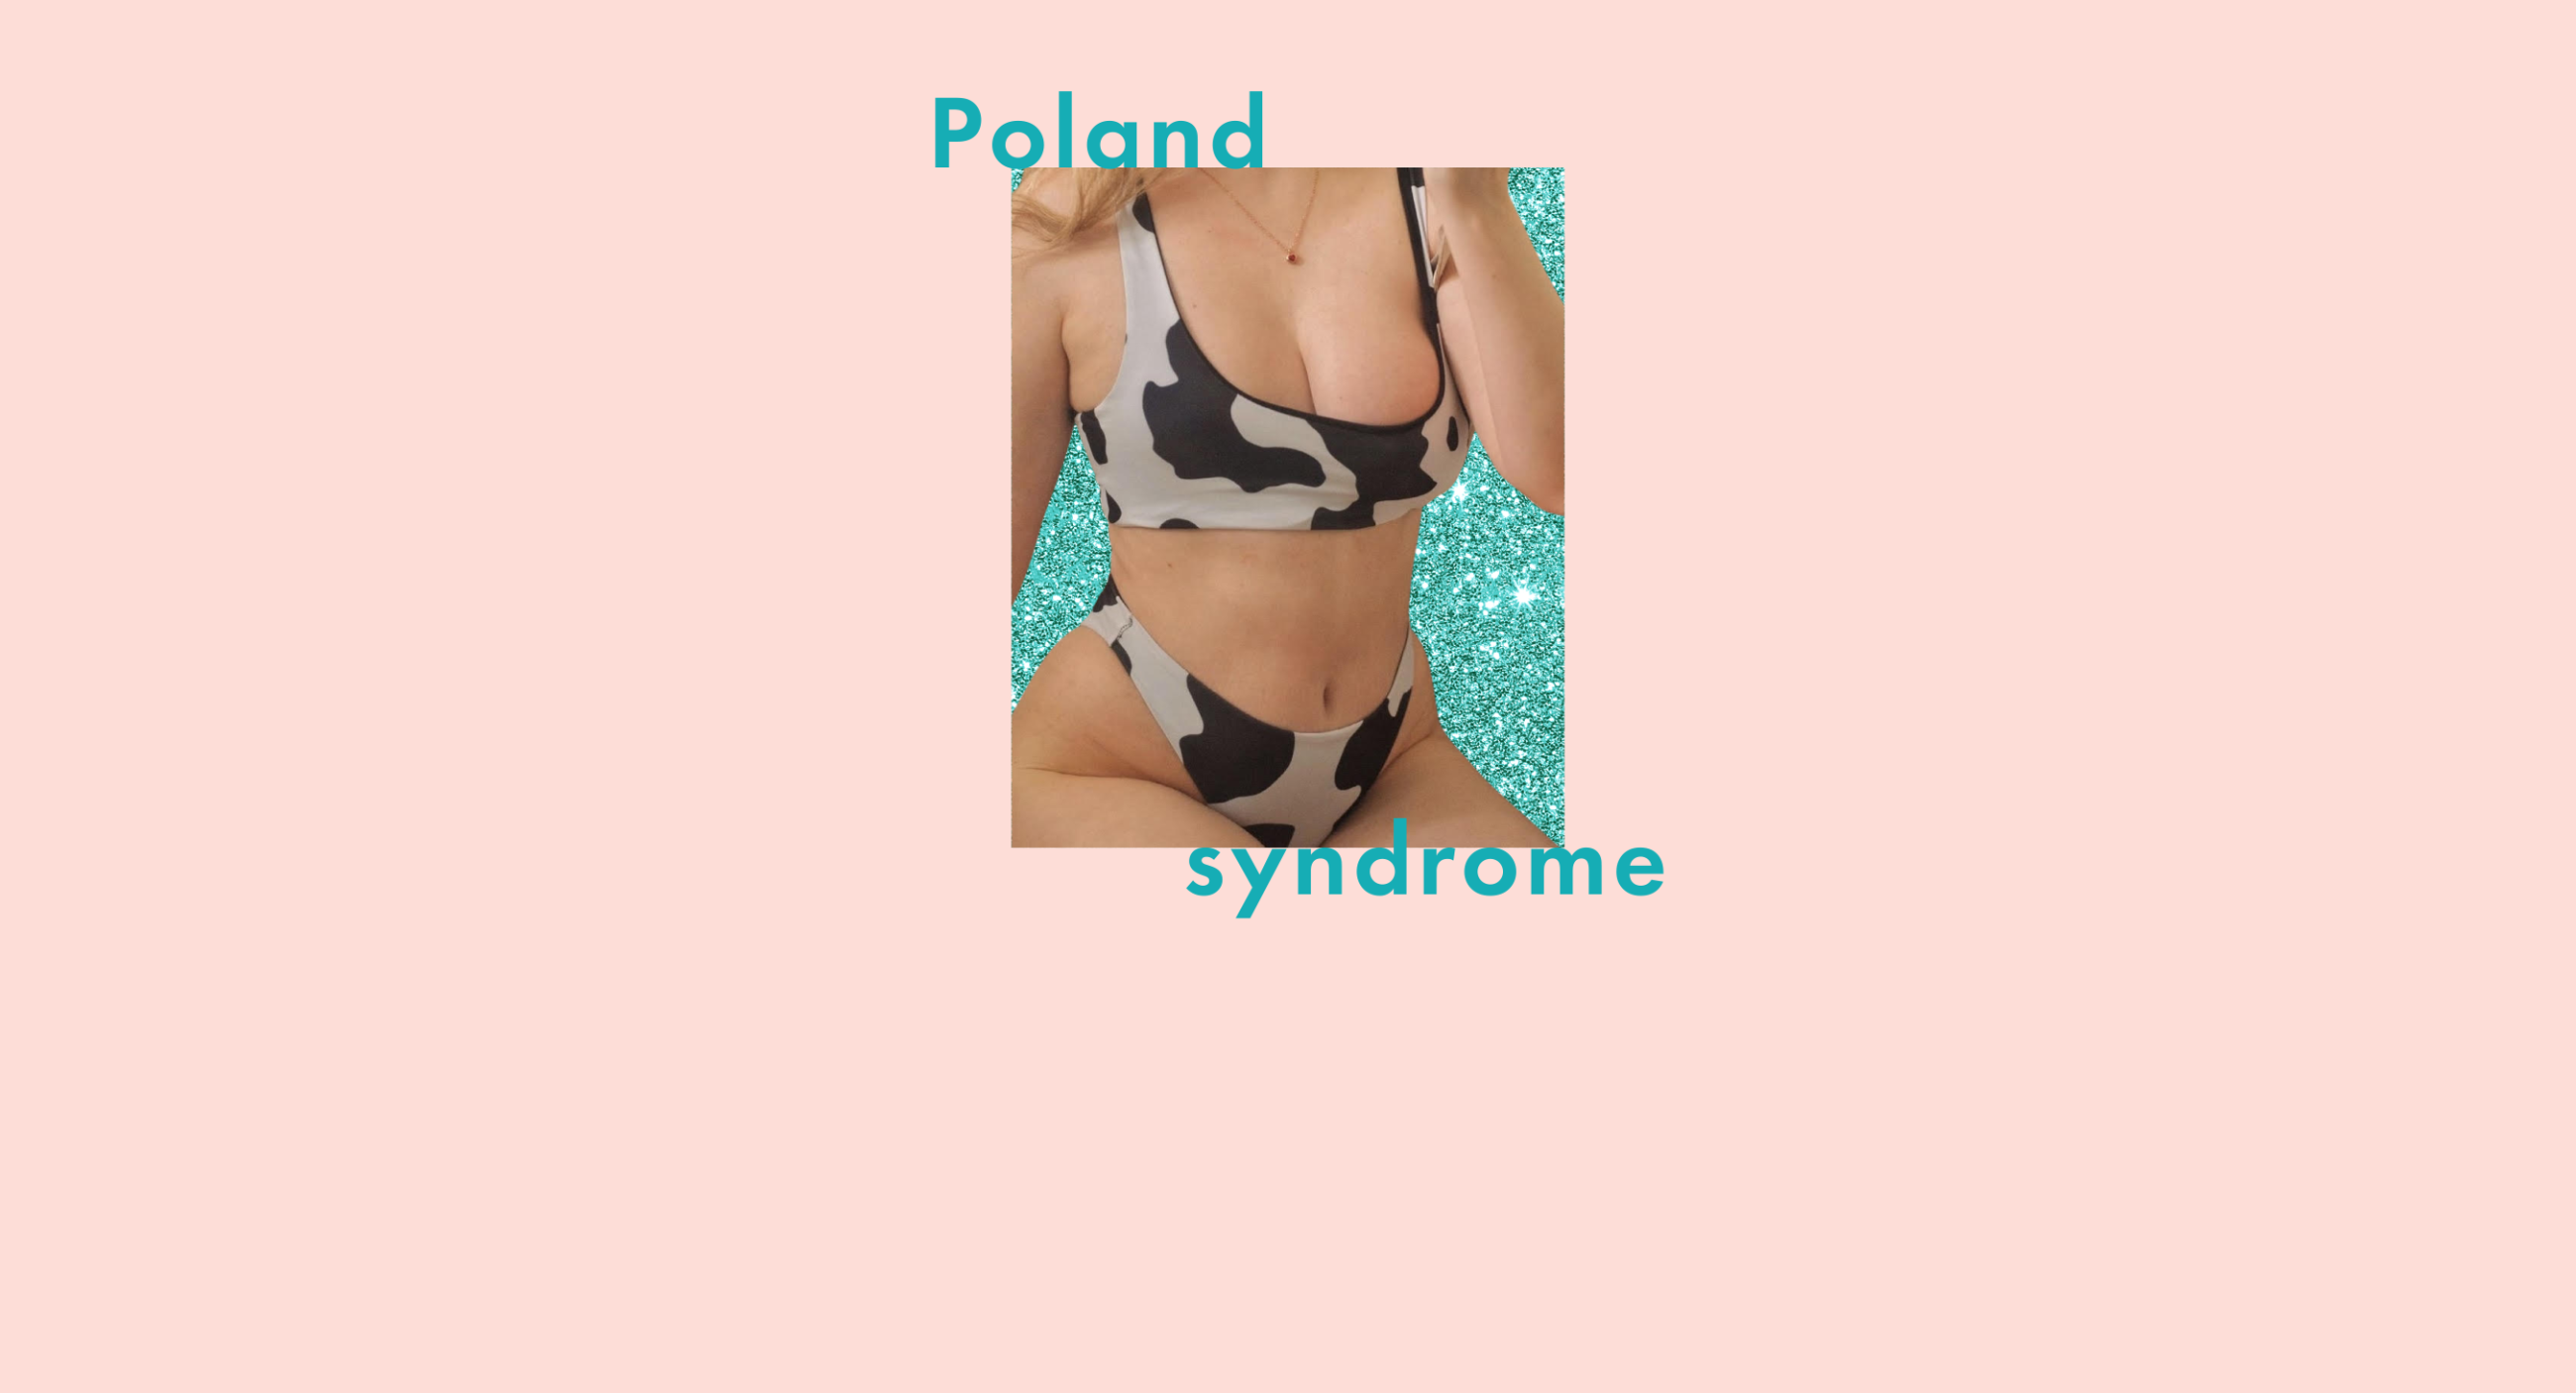 Poland Syndrome What its like to be a woman born with one boob image